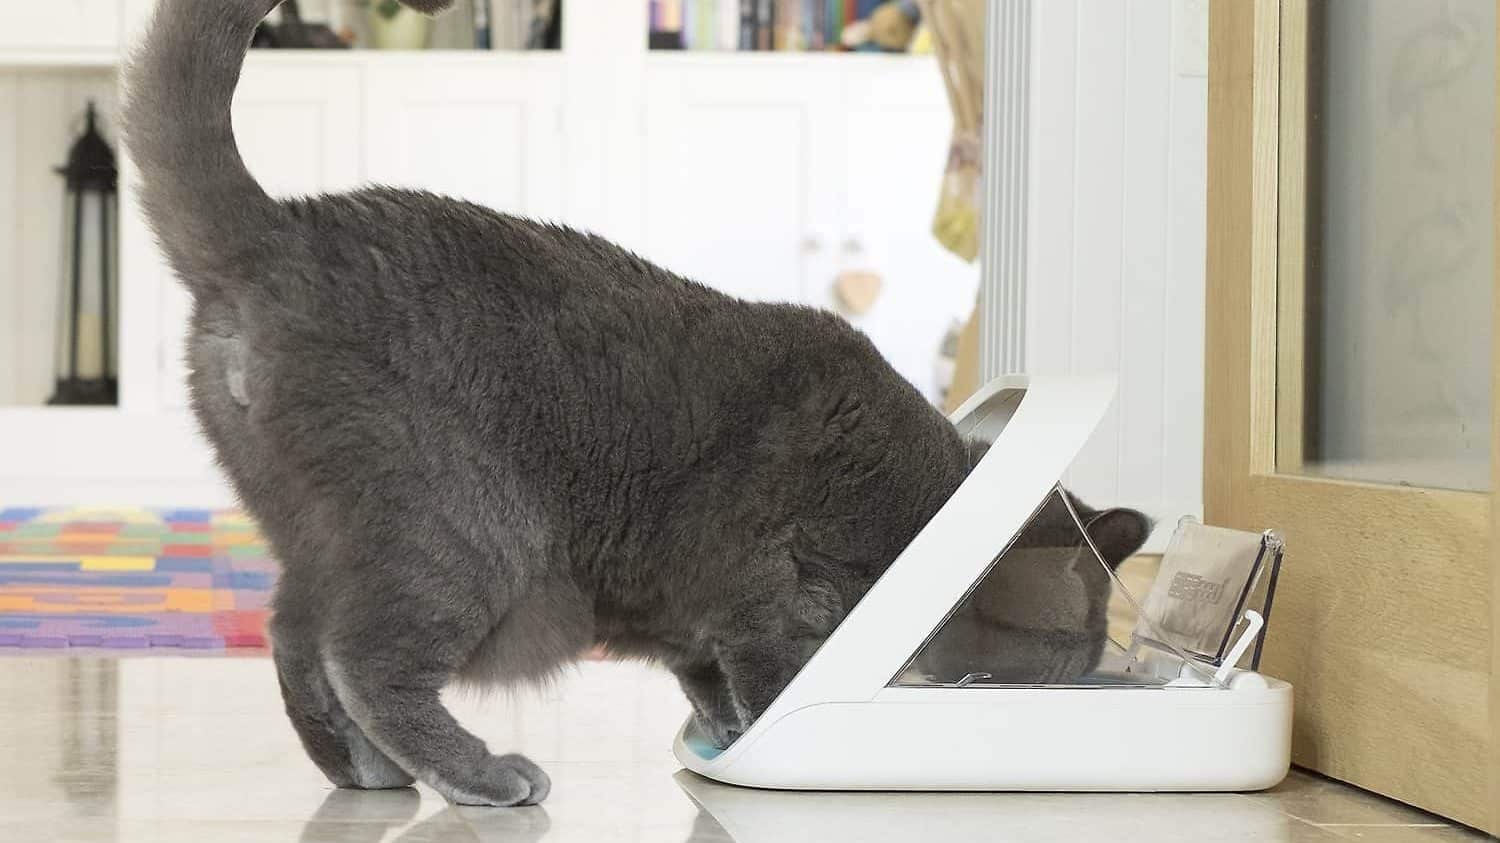 The 6 Best Automatic Cat Feeders The Dog People by